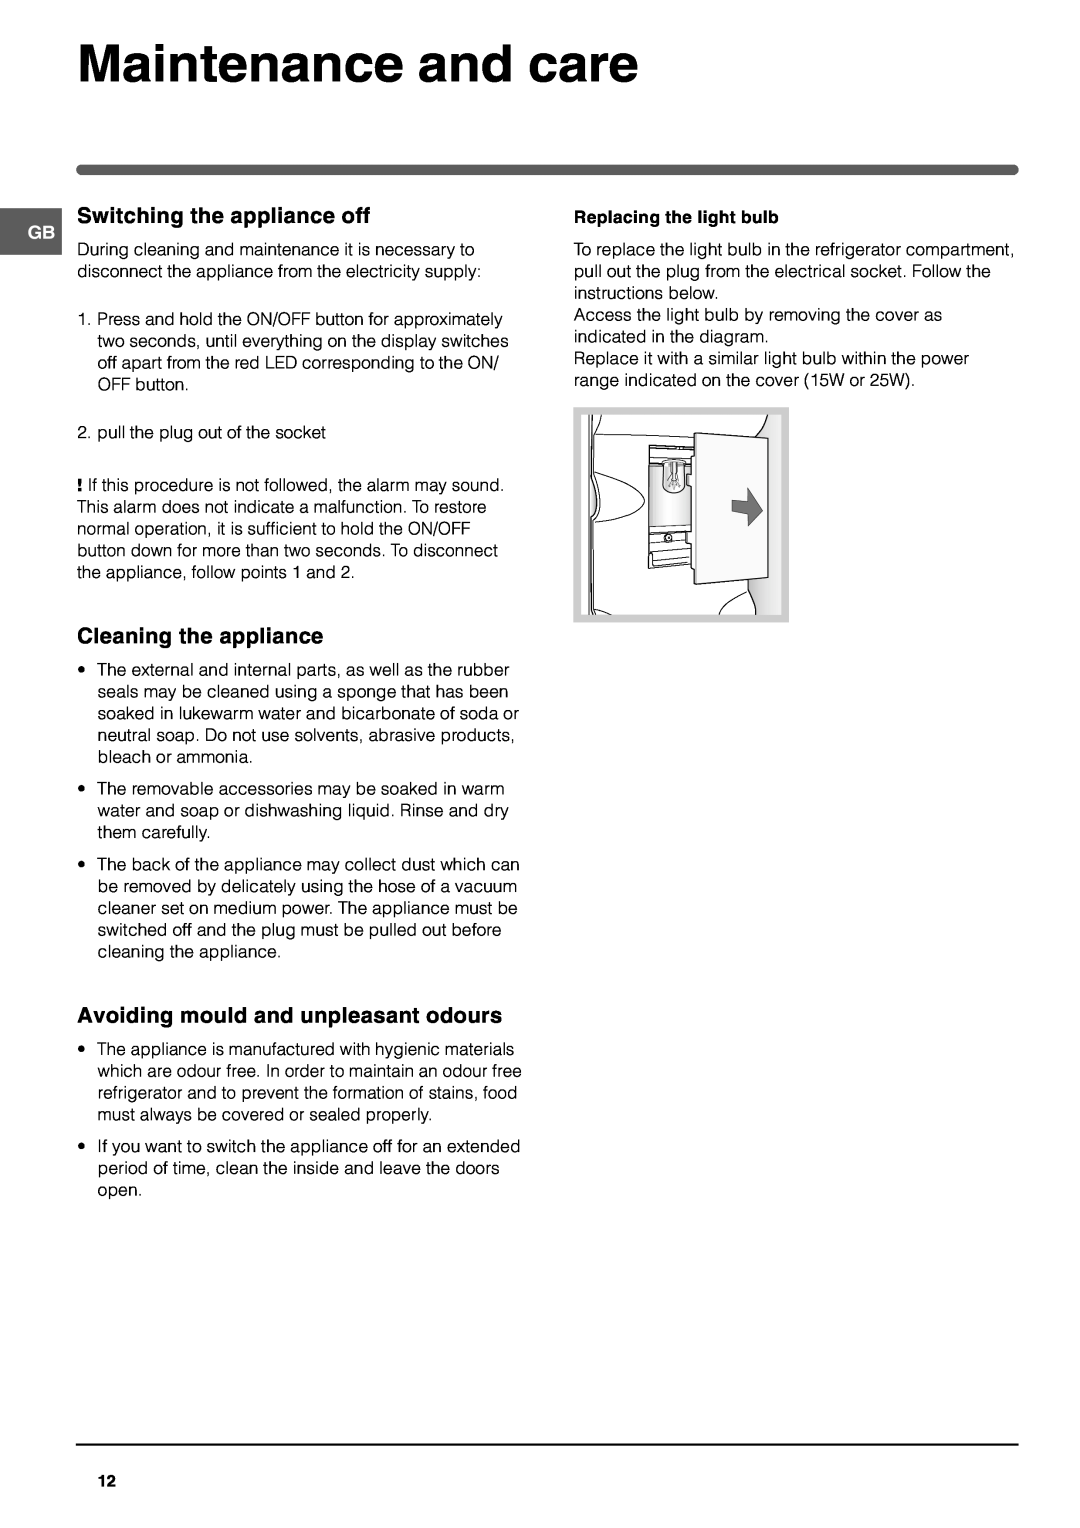 Hotpoint FF200TP manual Maintenance and care, Switching the appliance off, Cleaning the appliance 